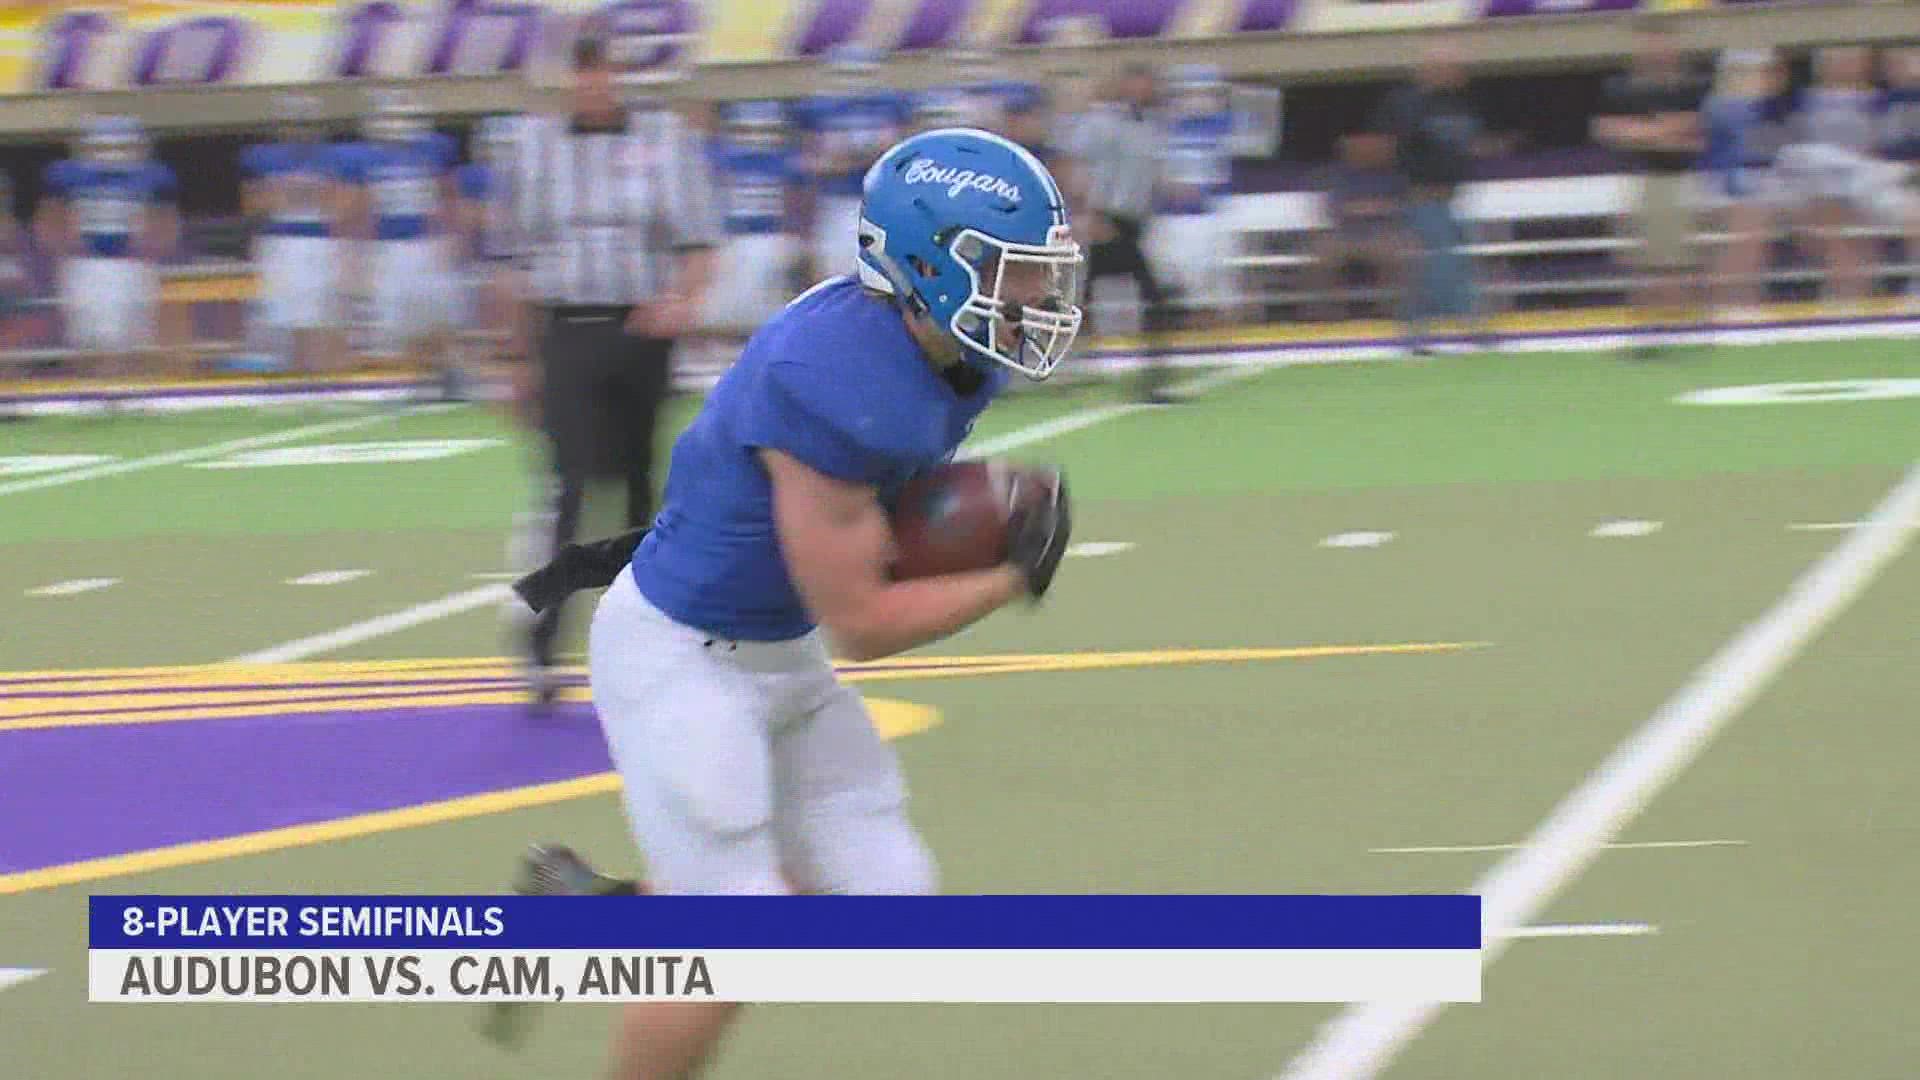 CAM topped Audubon 66-29 in the Cougars' first trip to the UNI Dome.